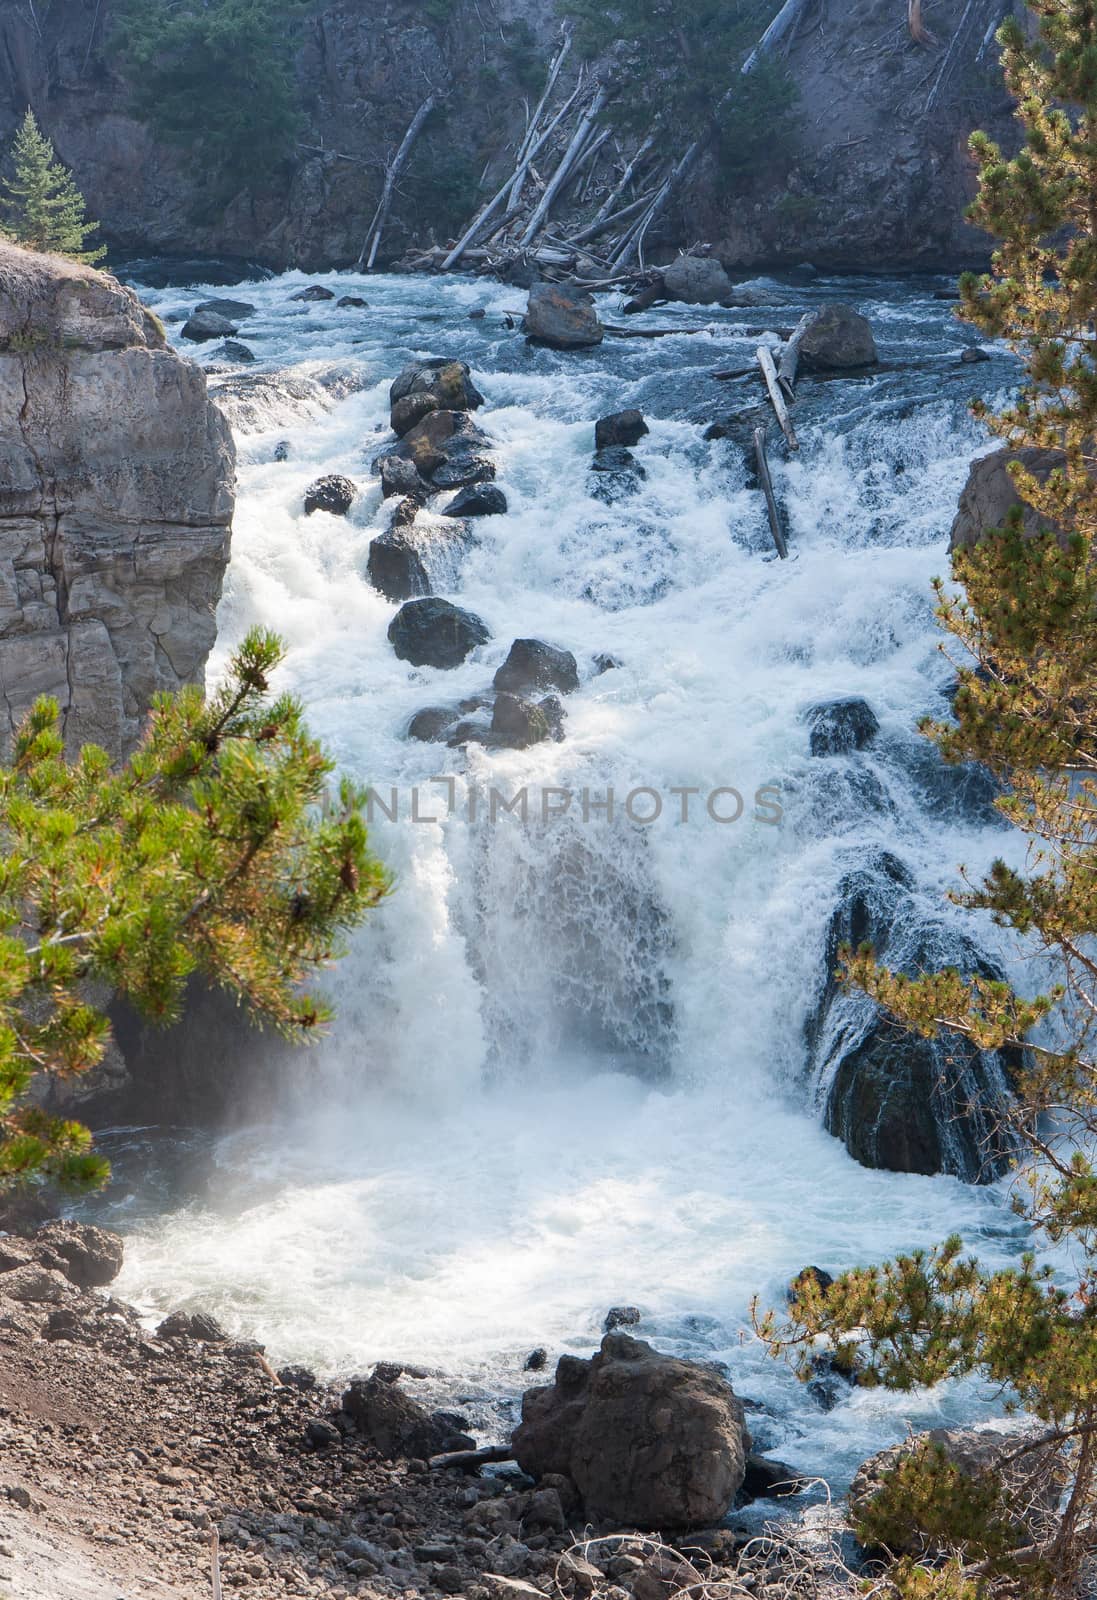 The Firehole River at Yellowstone National Park is a picturesque, pristine waterway.